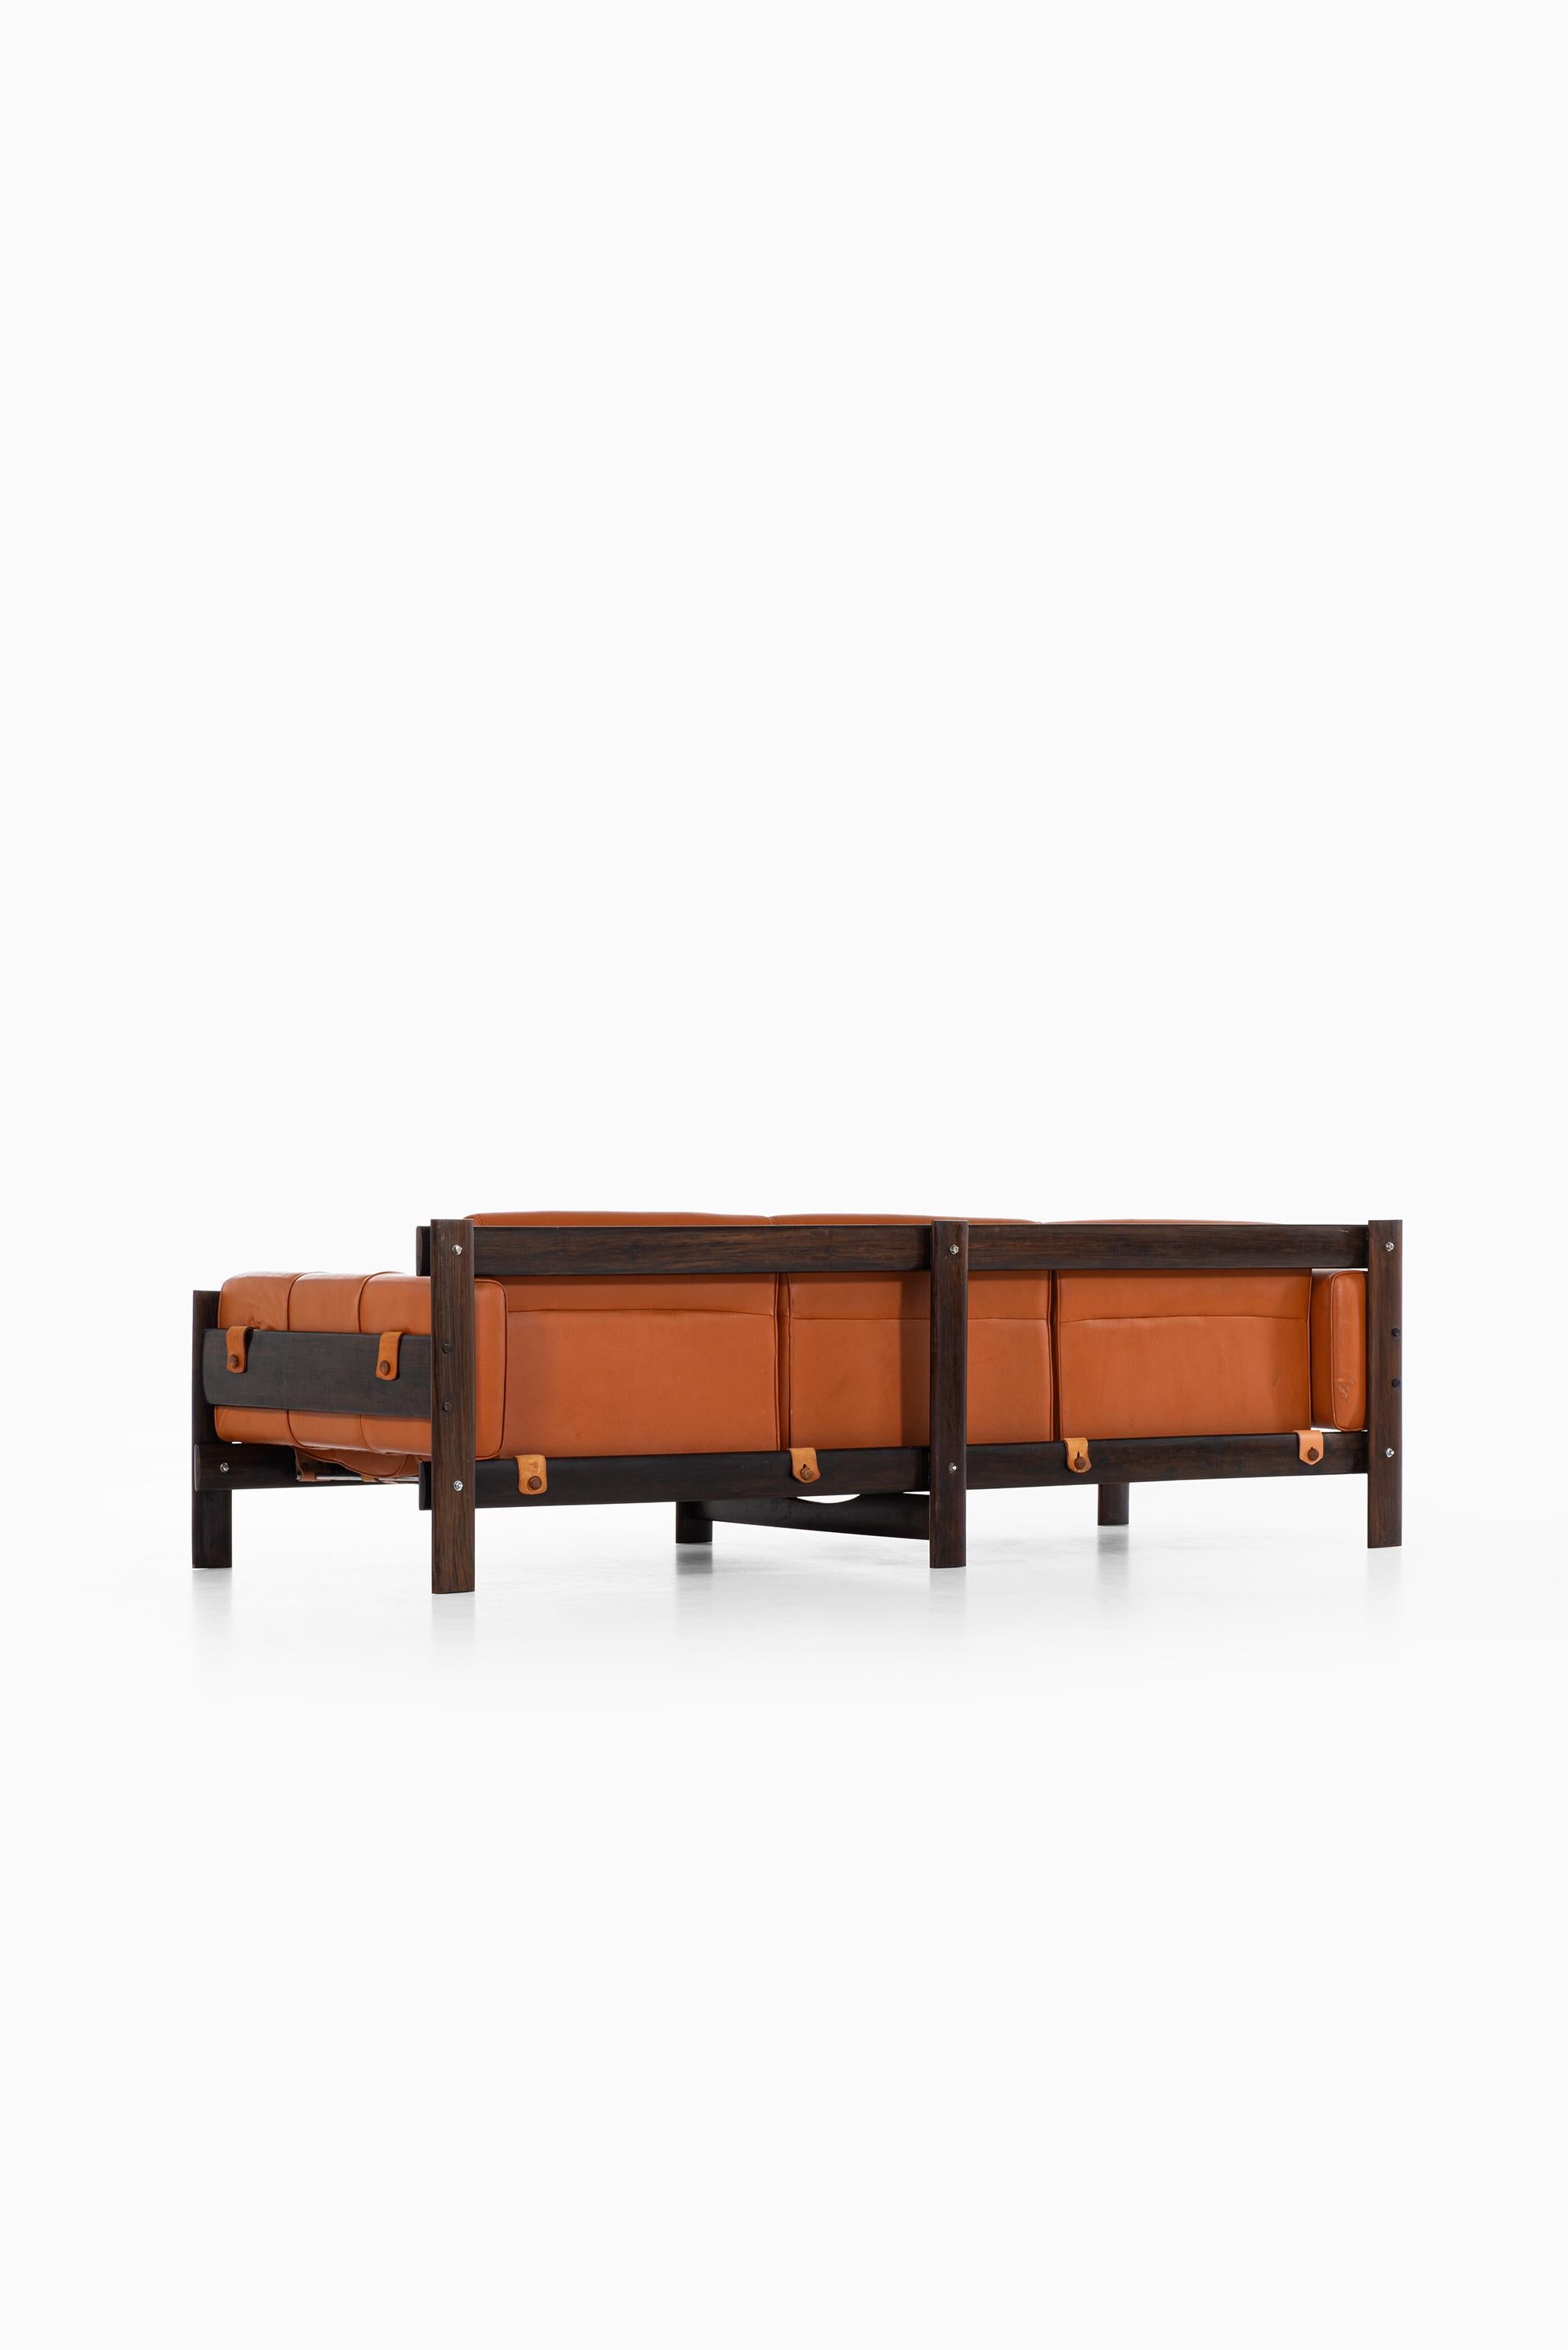 Percival Lafer Sofa in Rosewood and Leather by Lafer MP in Brazil In Good Condition In Limhamn, Skåne län